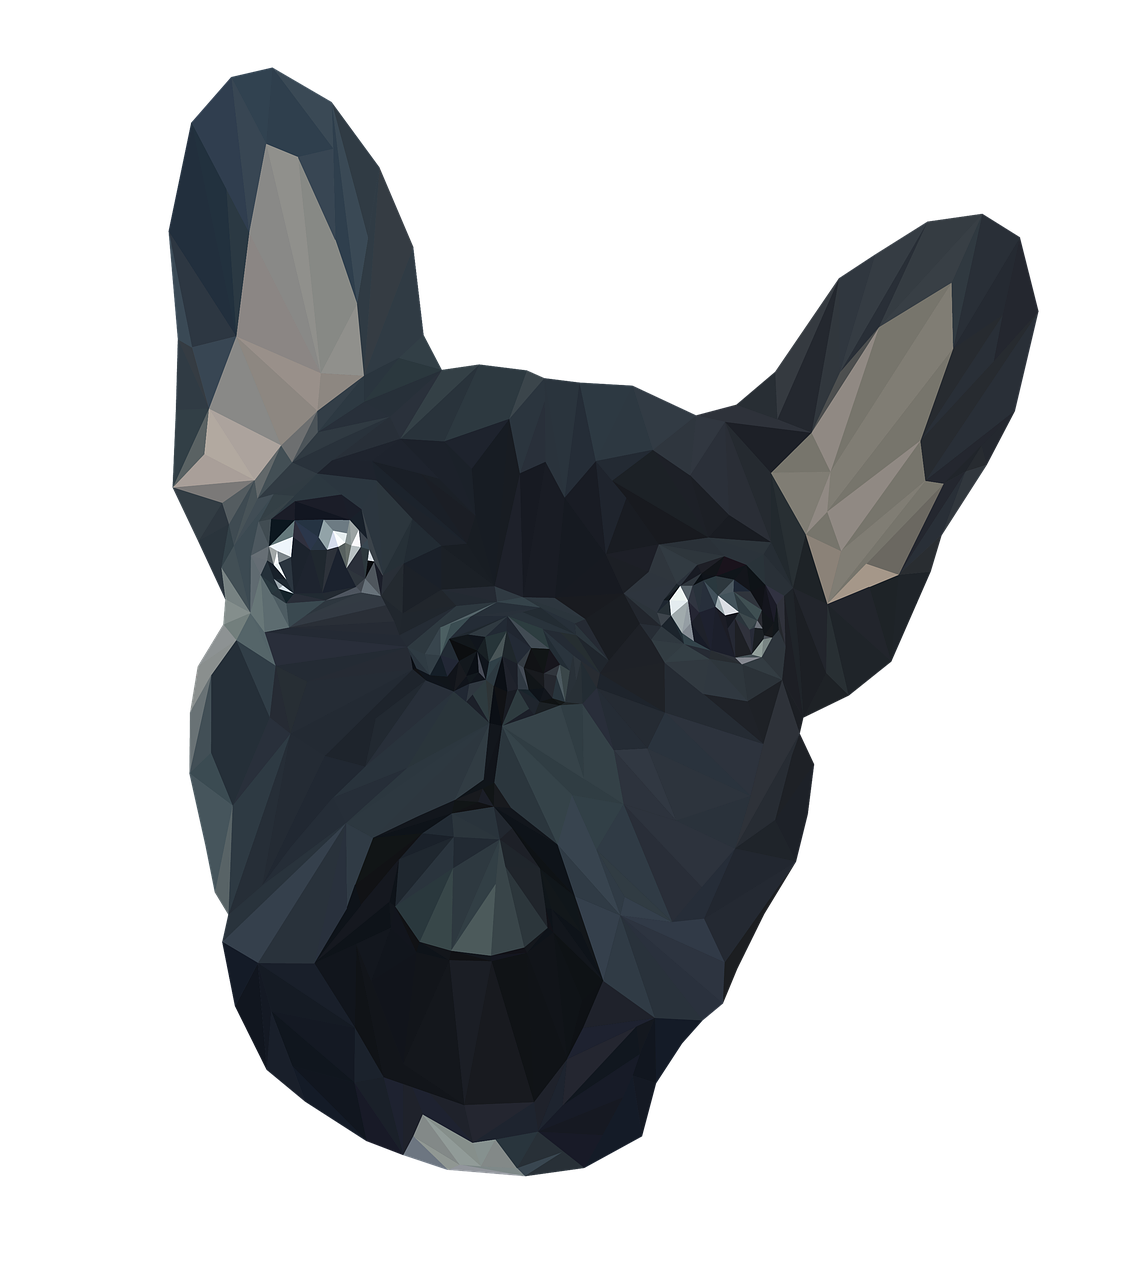 a close up of a dog's face on a black background, vector art, shutterstock, generative art, low polygons illustration, french bulldog, low poly 3d model, gouache